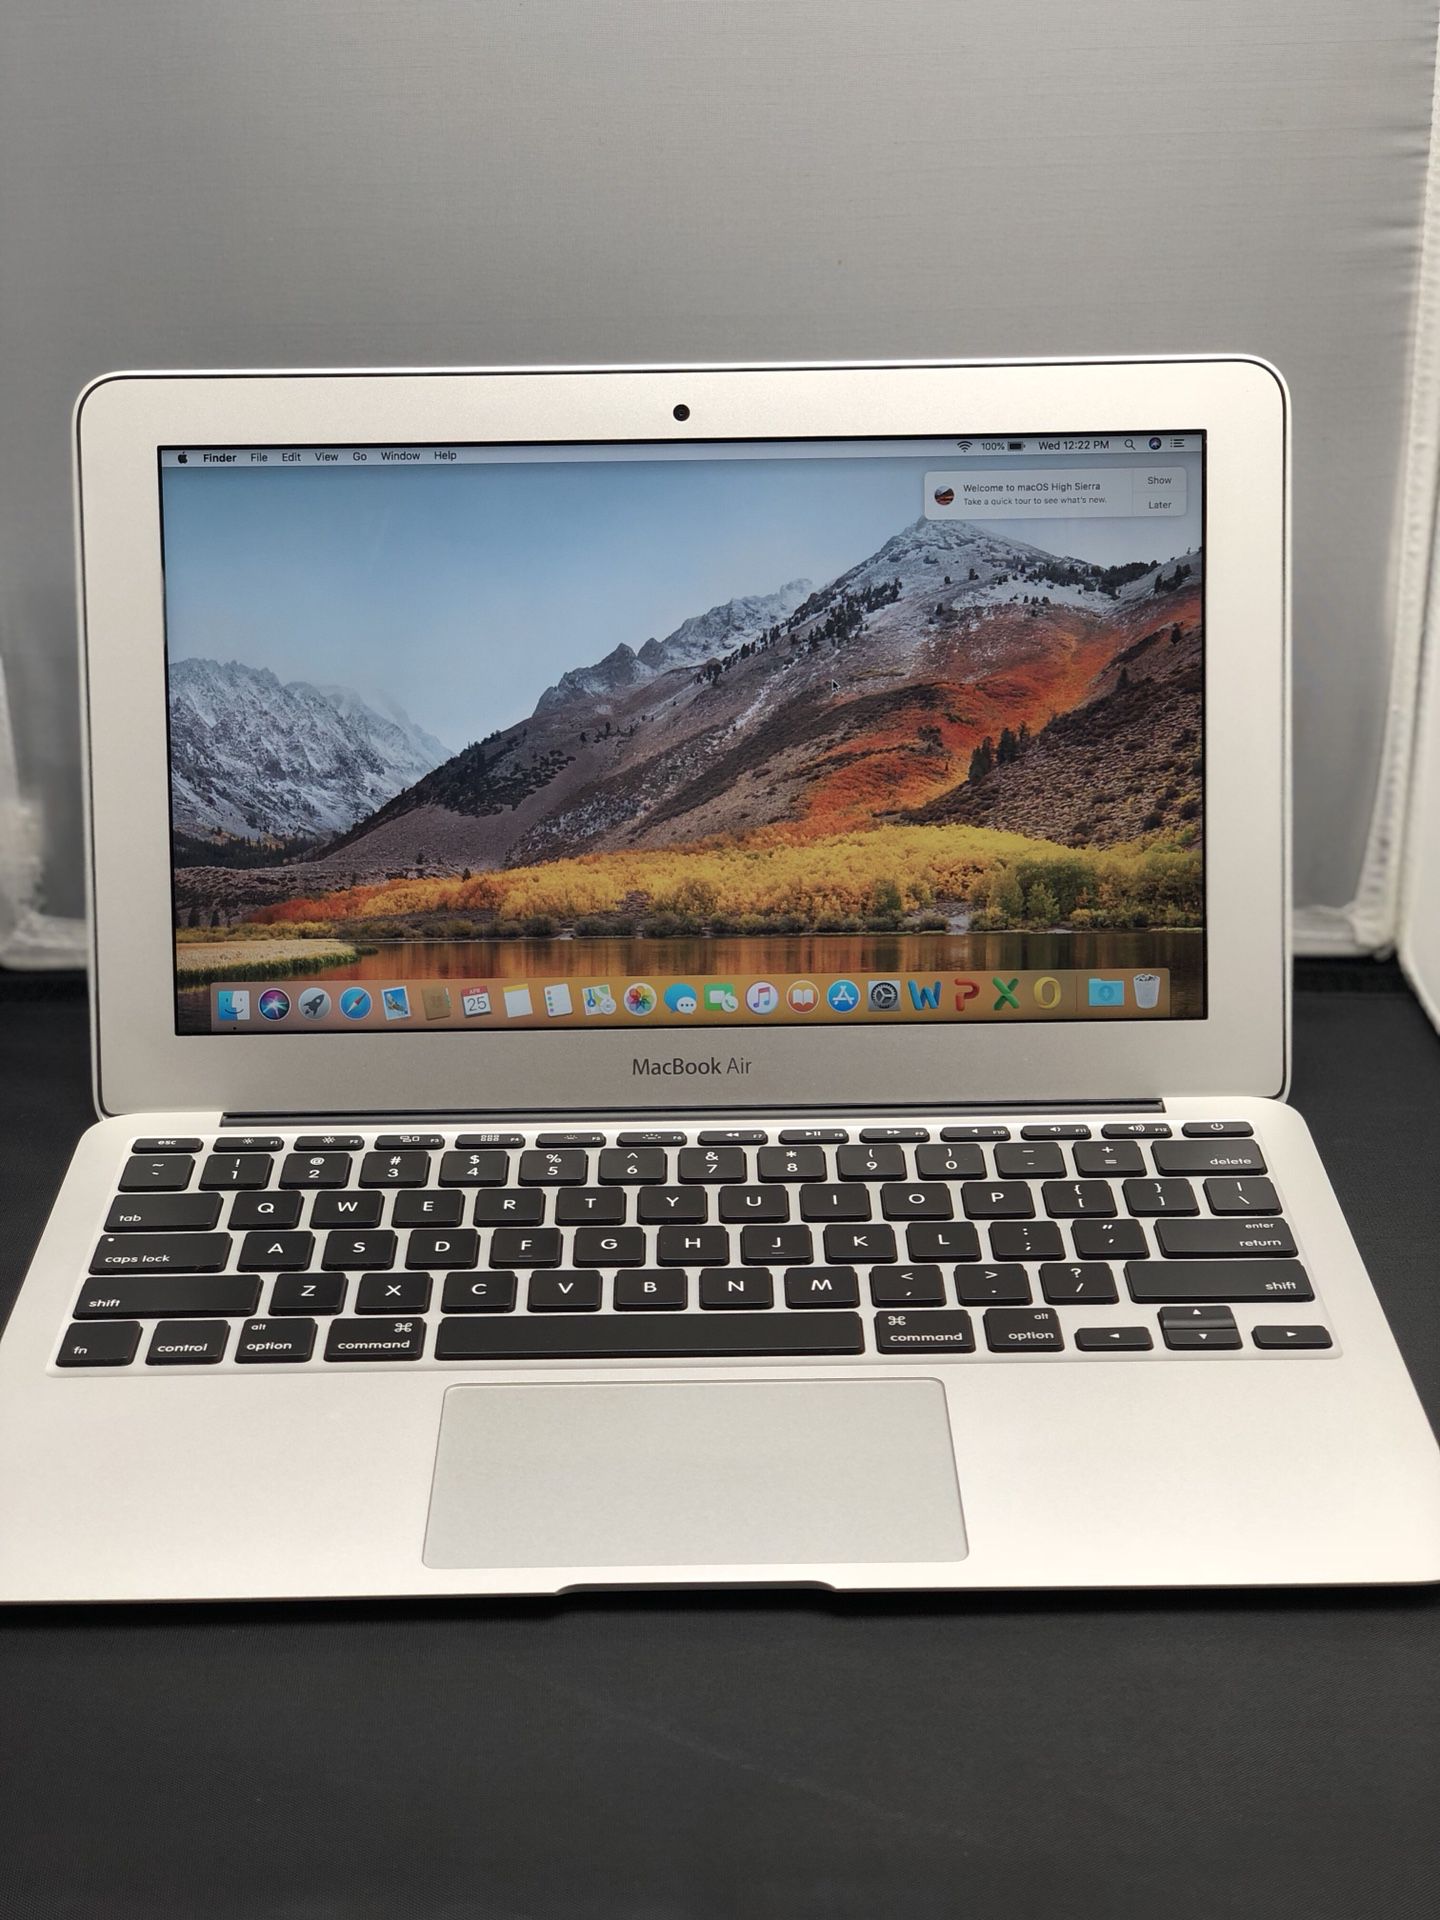 Apple MacBook Air 11” inch 1.7ghz i5 64gb 2gb ram mid 2012 with Mac OS 10.13 high Sierra ++Microsoft office and apple OEM CHARGER ,3MONTH WARRANTY